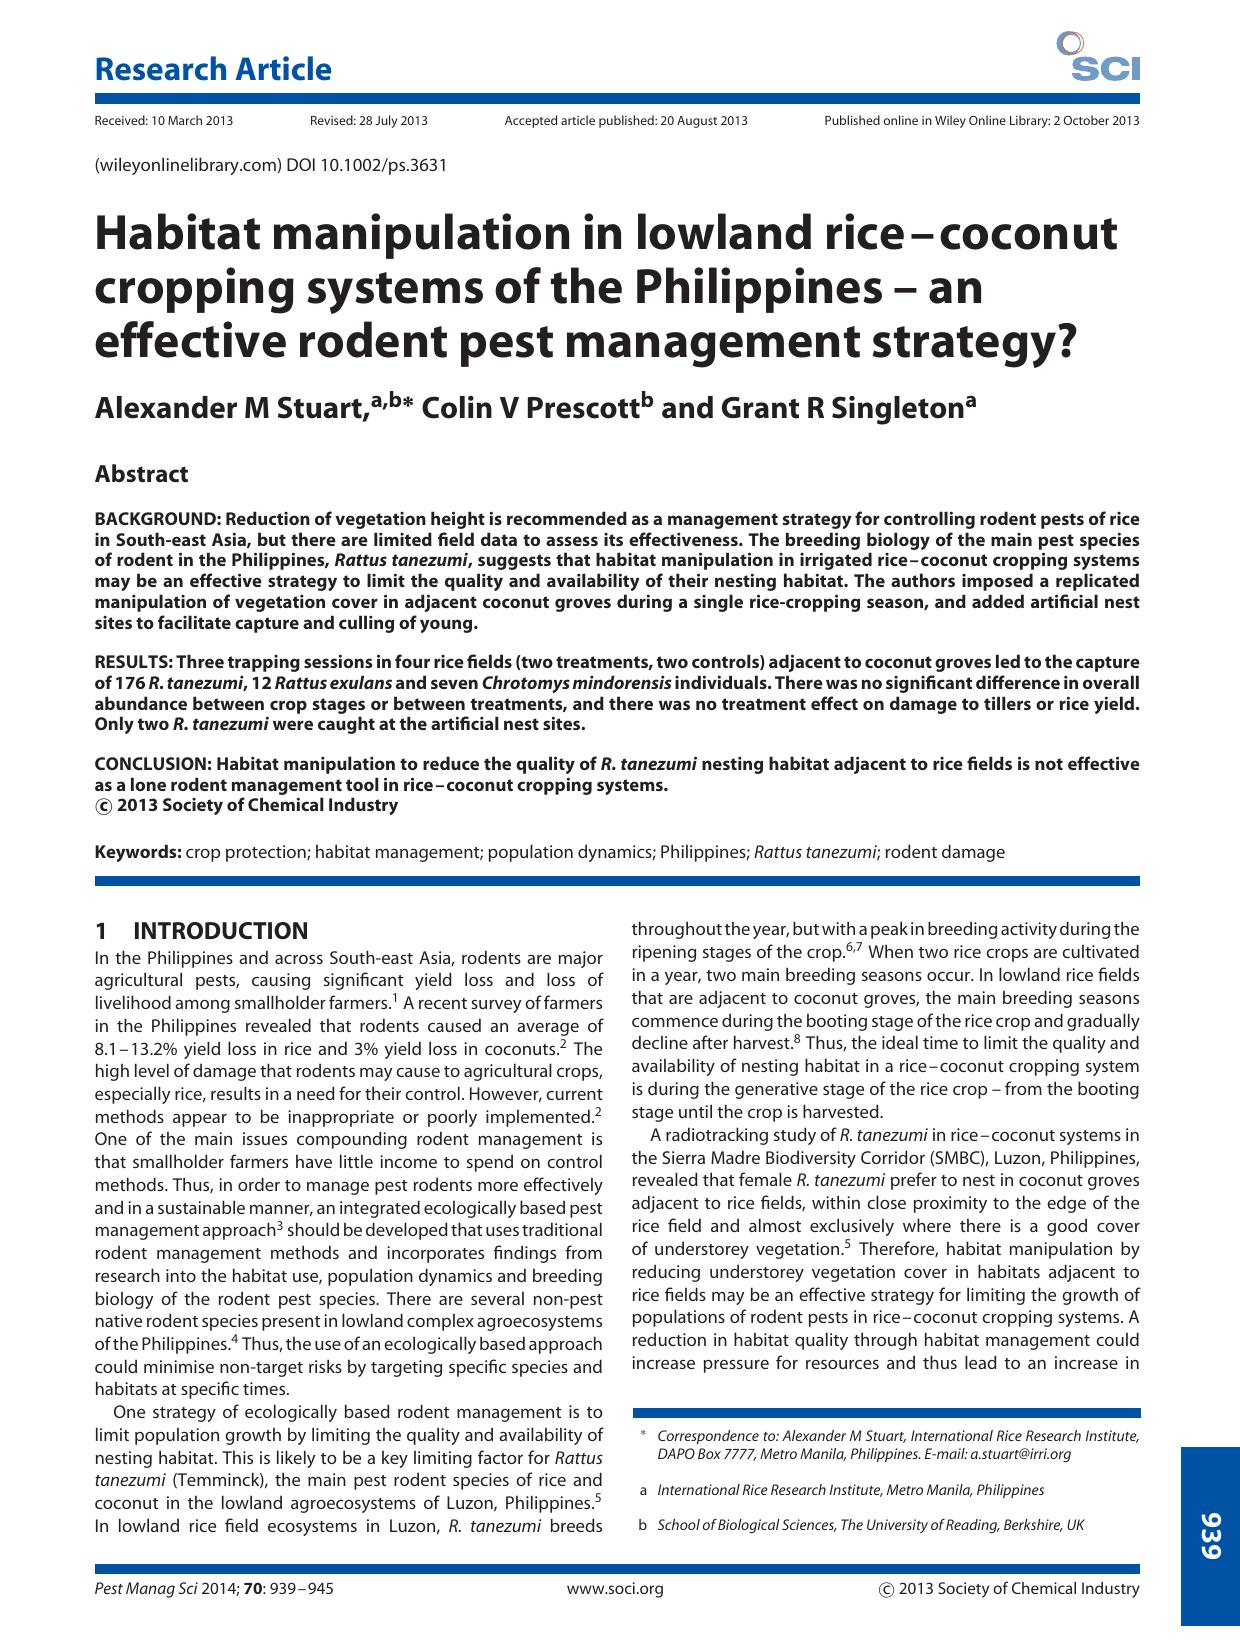 Habitat manipulation in lowland ricecoconut cropping systems of the Philippinesan effective rodent pest management strategy? by Unknown